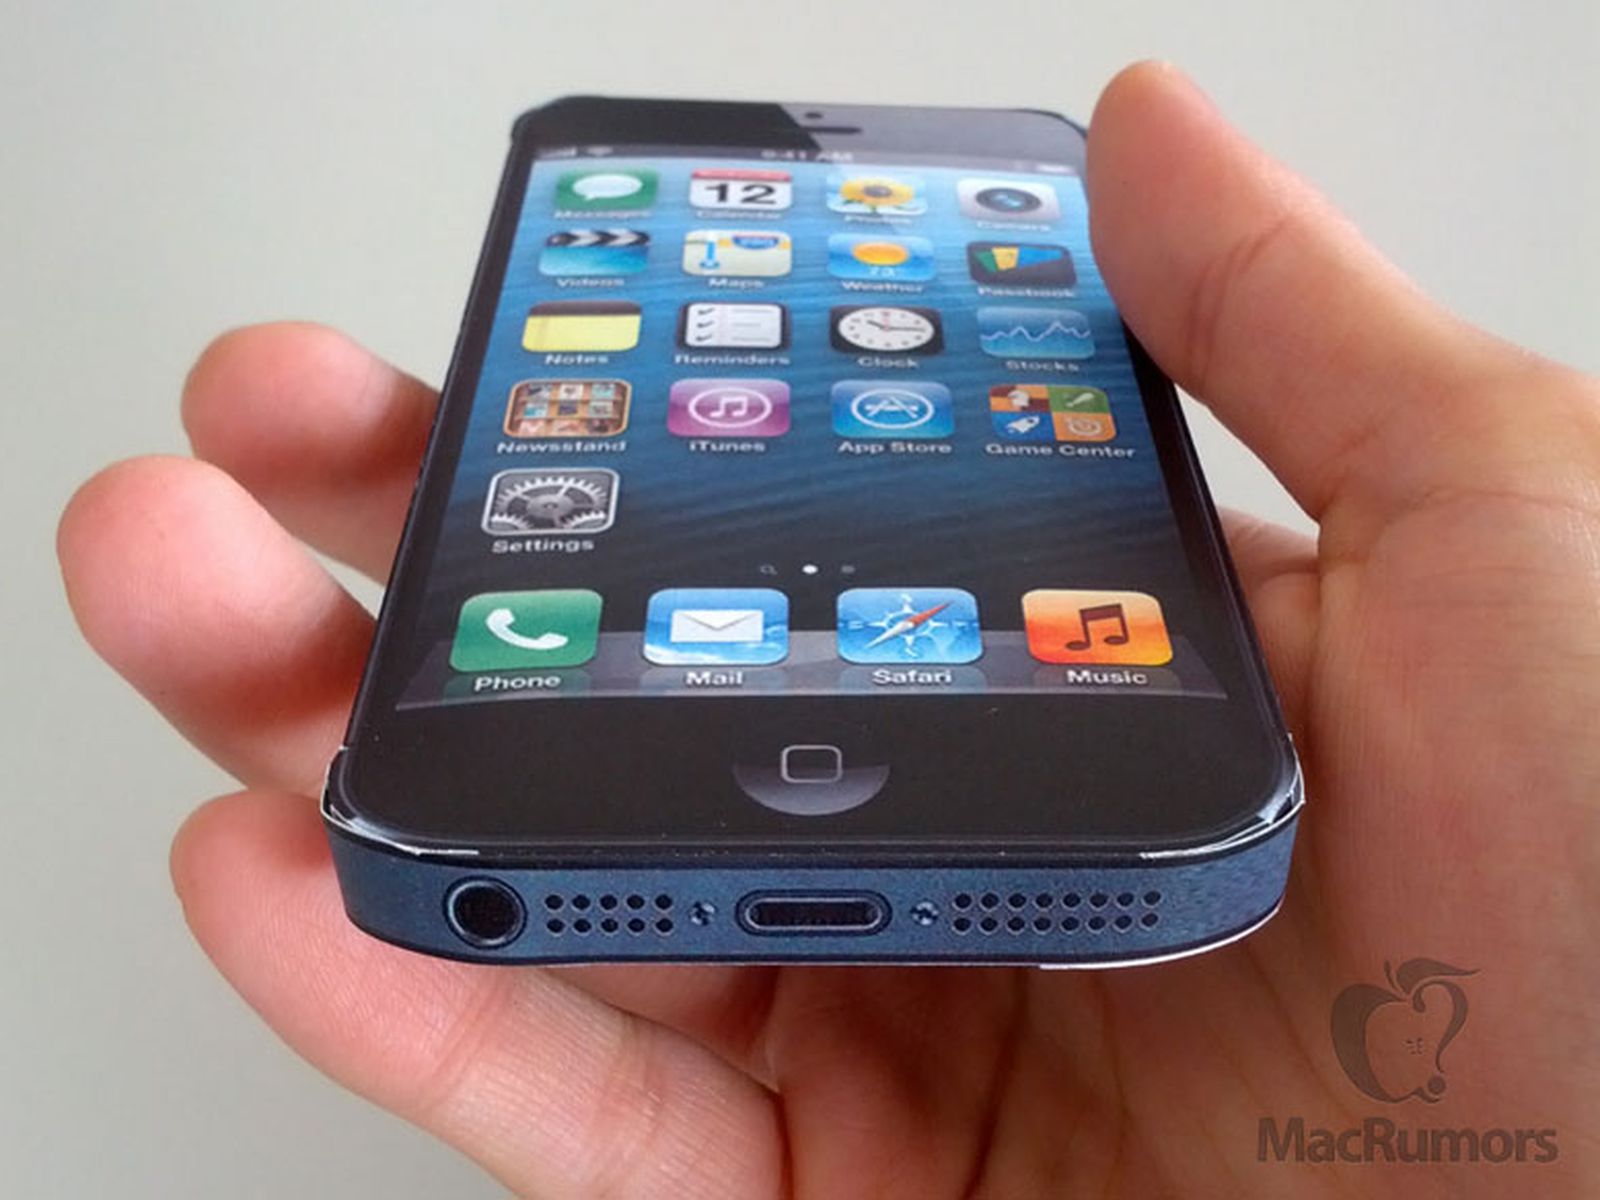 iphone 5 black in hand